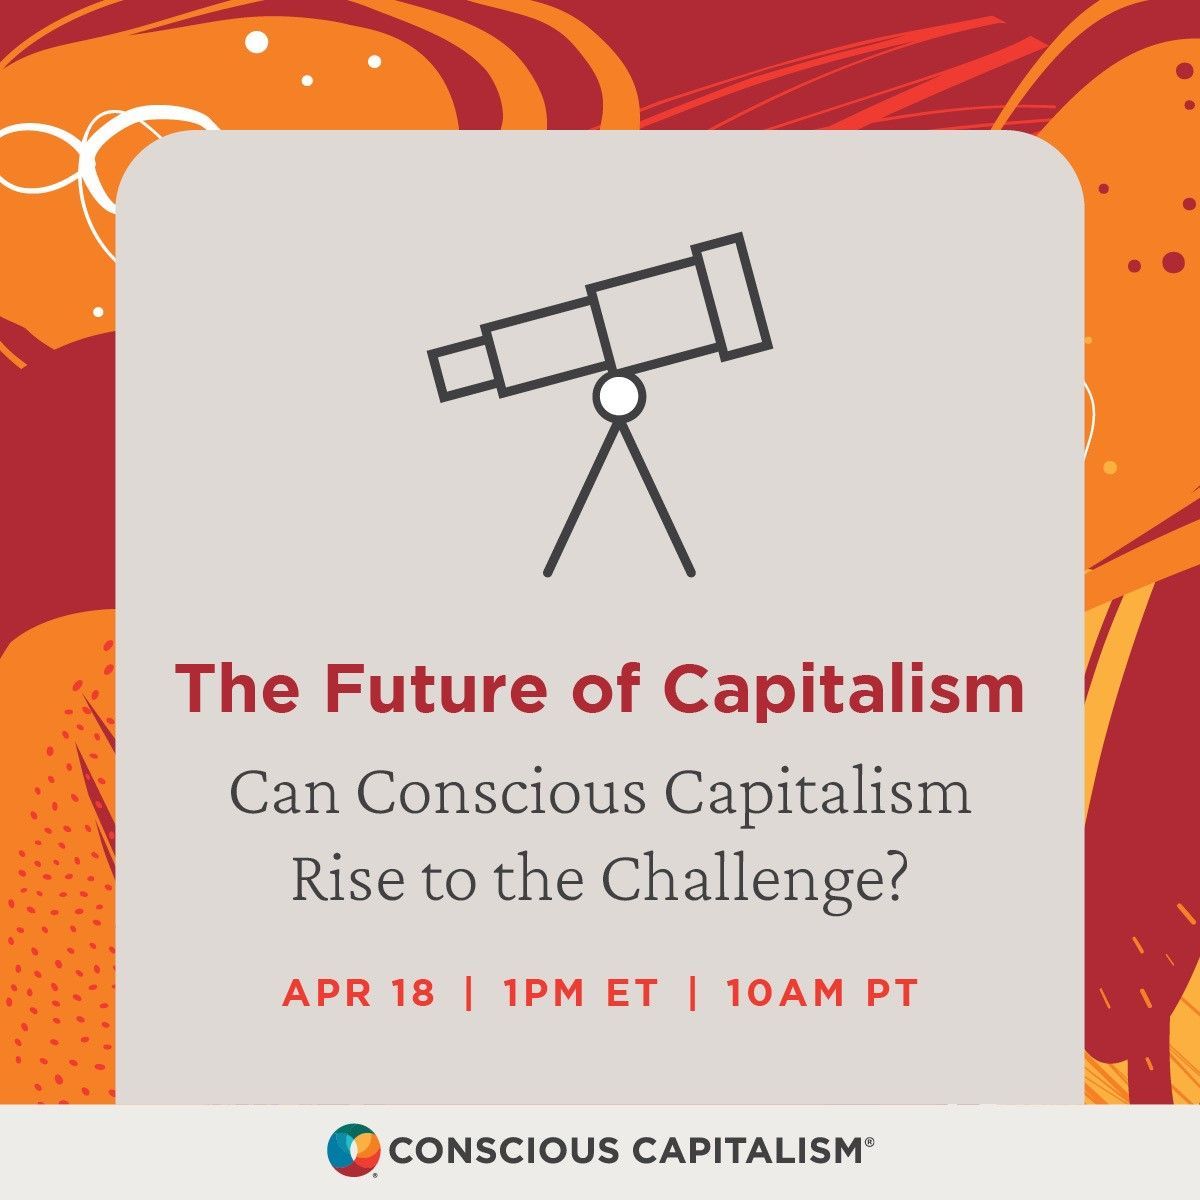 The future of capitalism is being debated as the world is changing. So, the question is... Can @ConsciousCap rise to the challenge? 

Our CEO, Curtis Hite, will delve into this topic tomorrow! Register here: bit.ly/4aFxdsi 

#lifeatimproving #consciouscapitalism